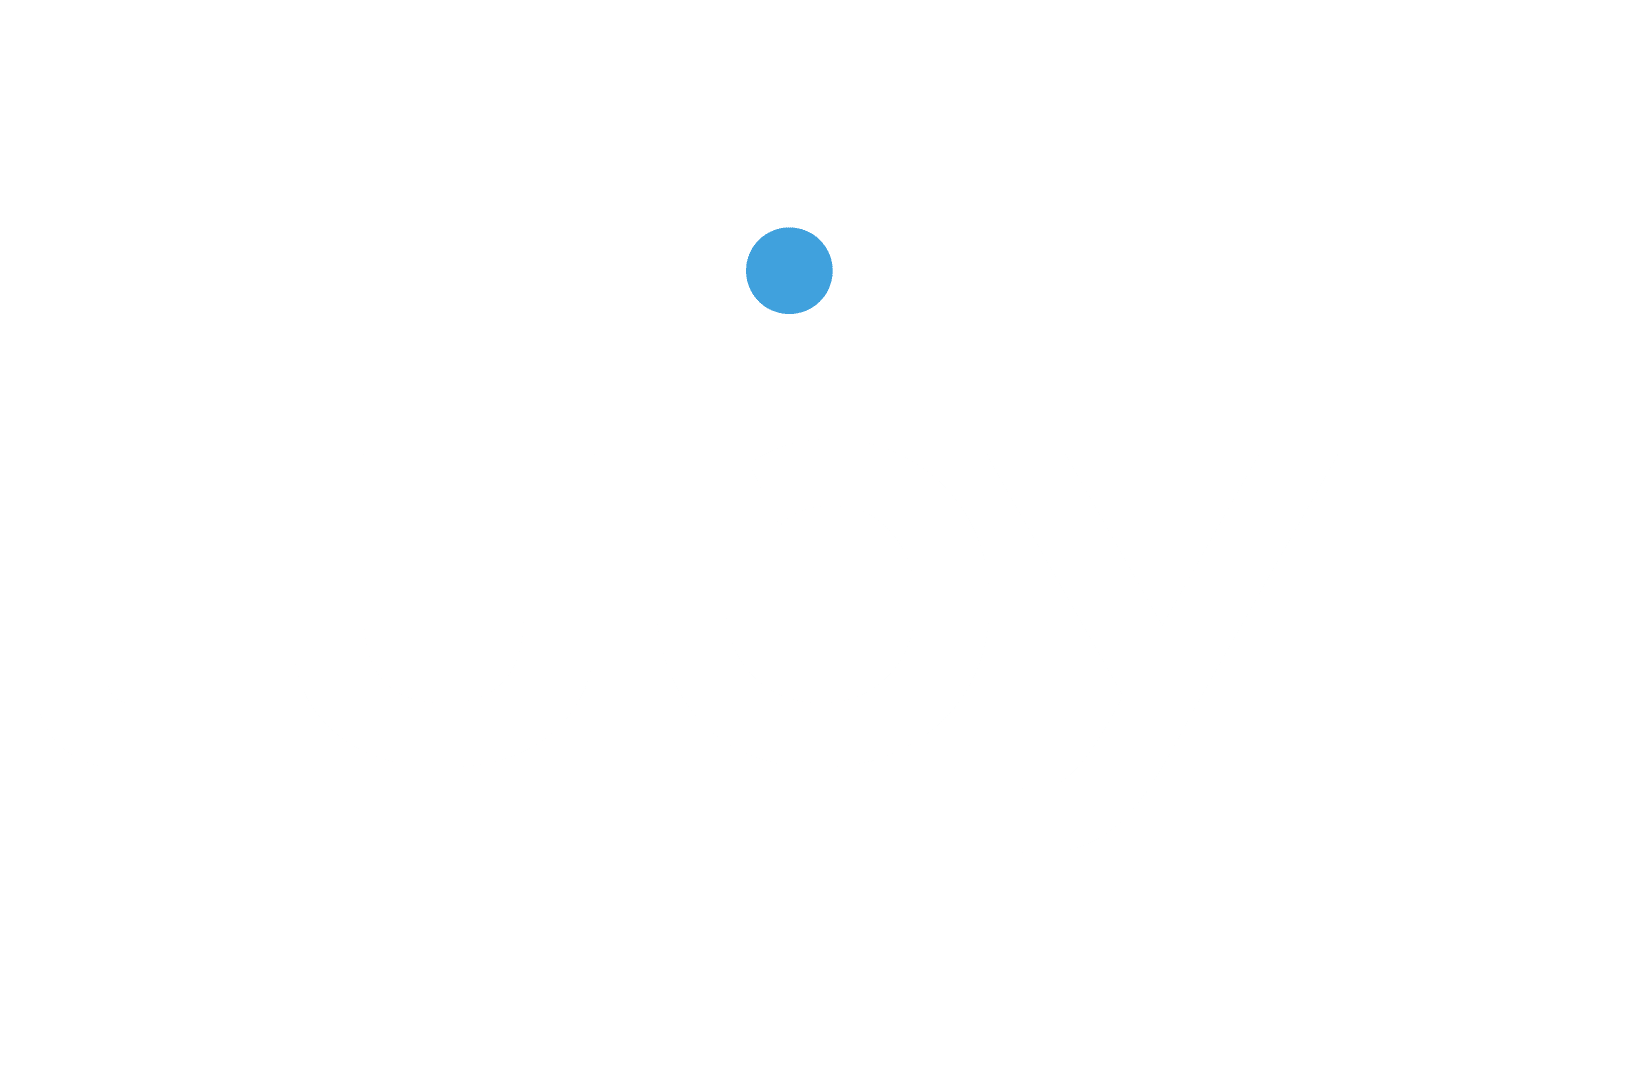 Contato Luby Software